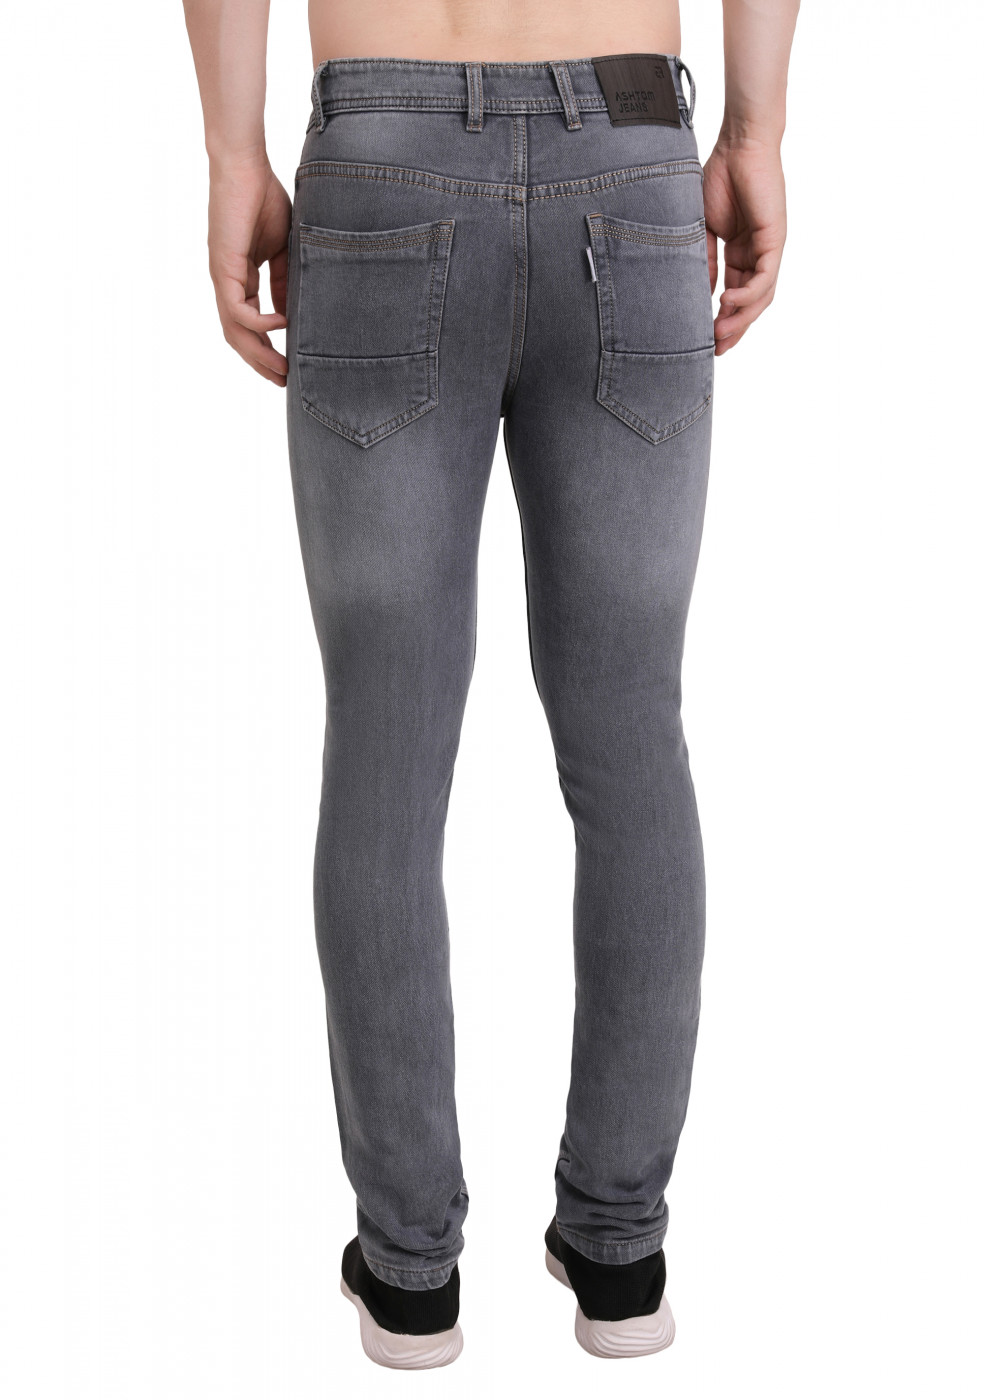 Gray Shaded Jeans For Men